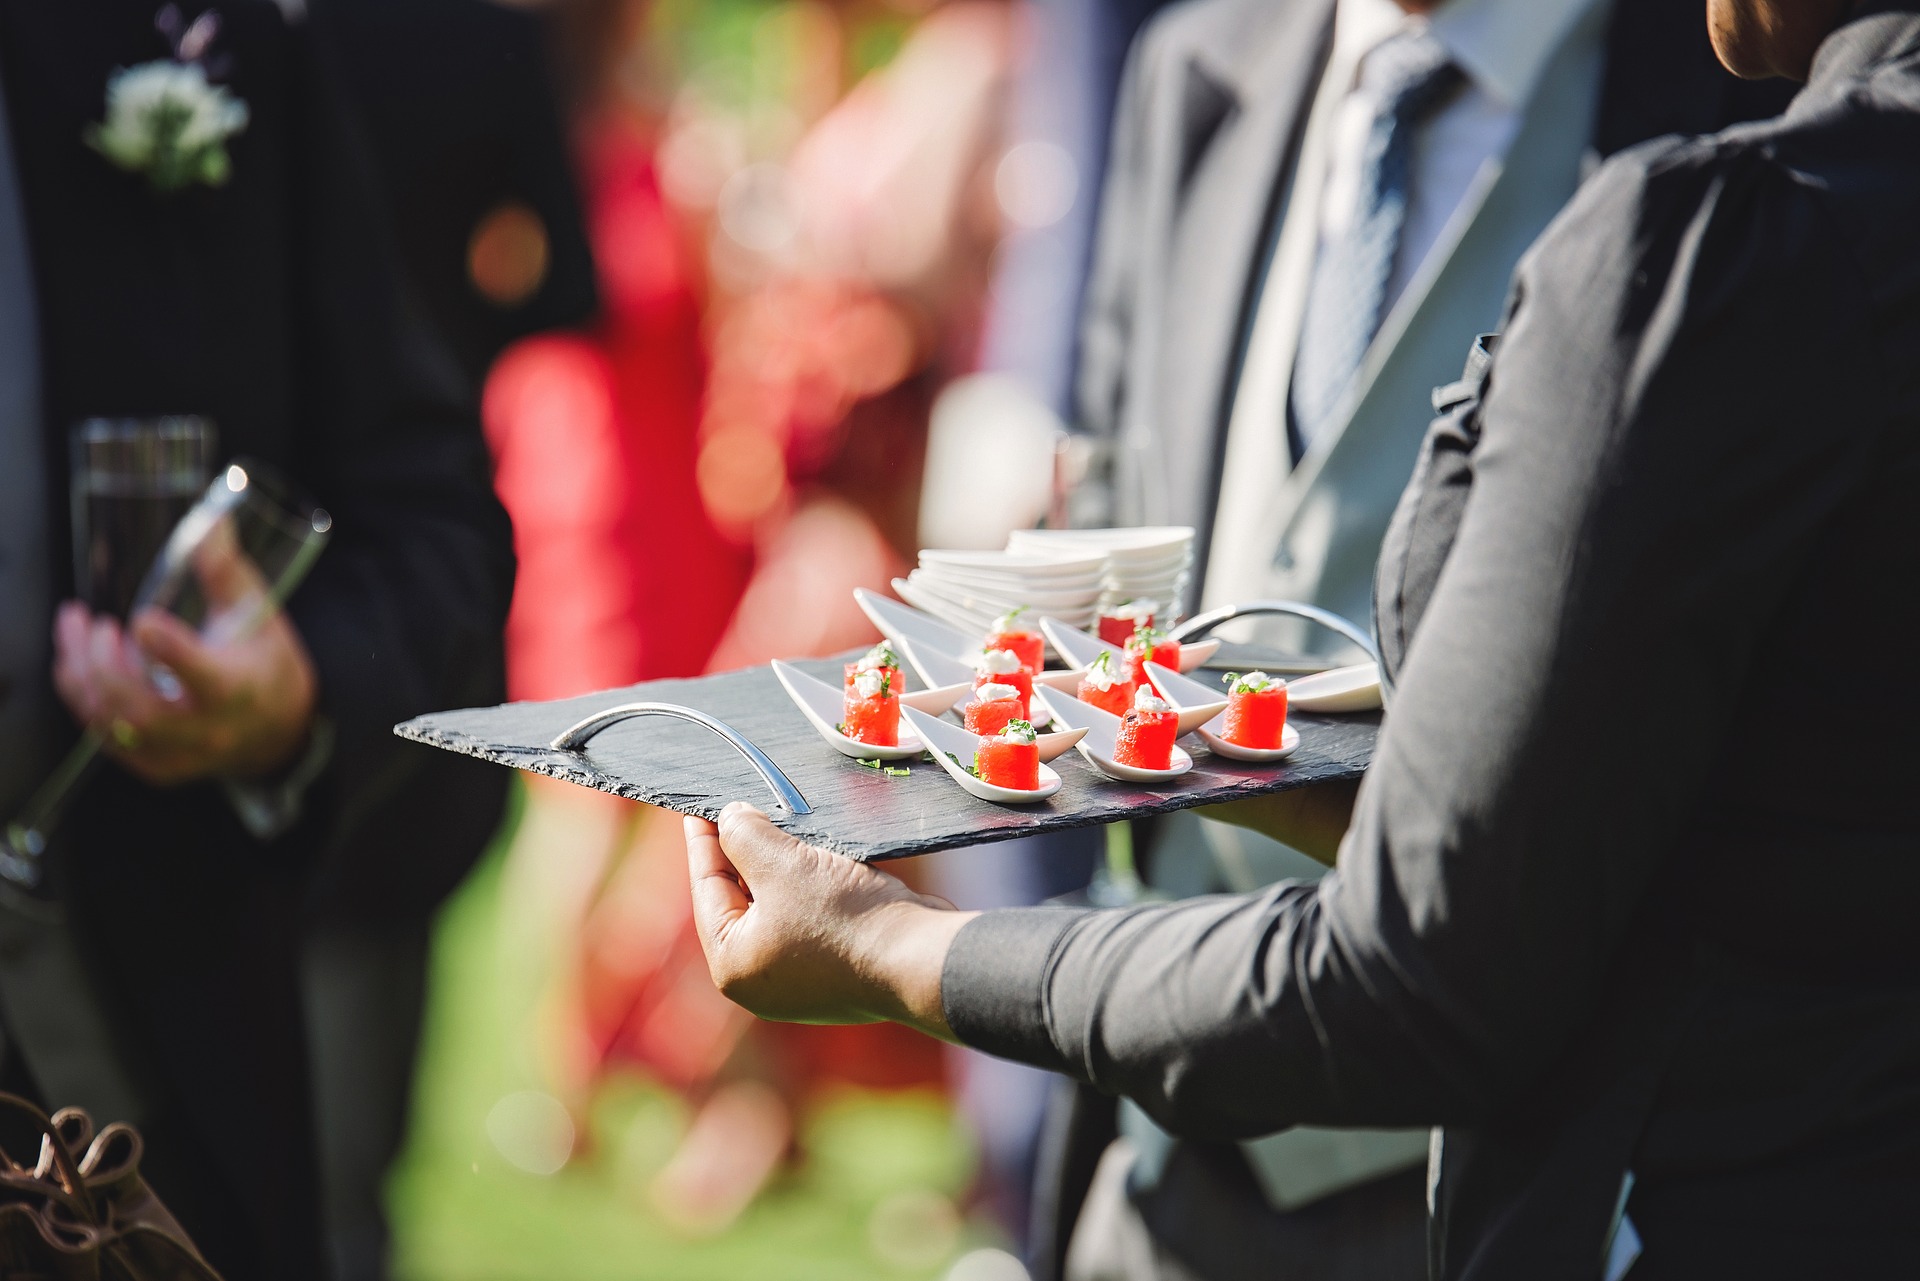 Canapés being served